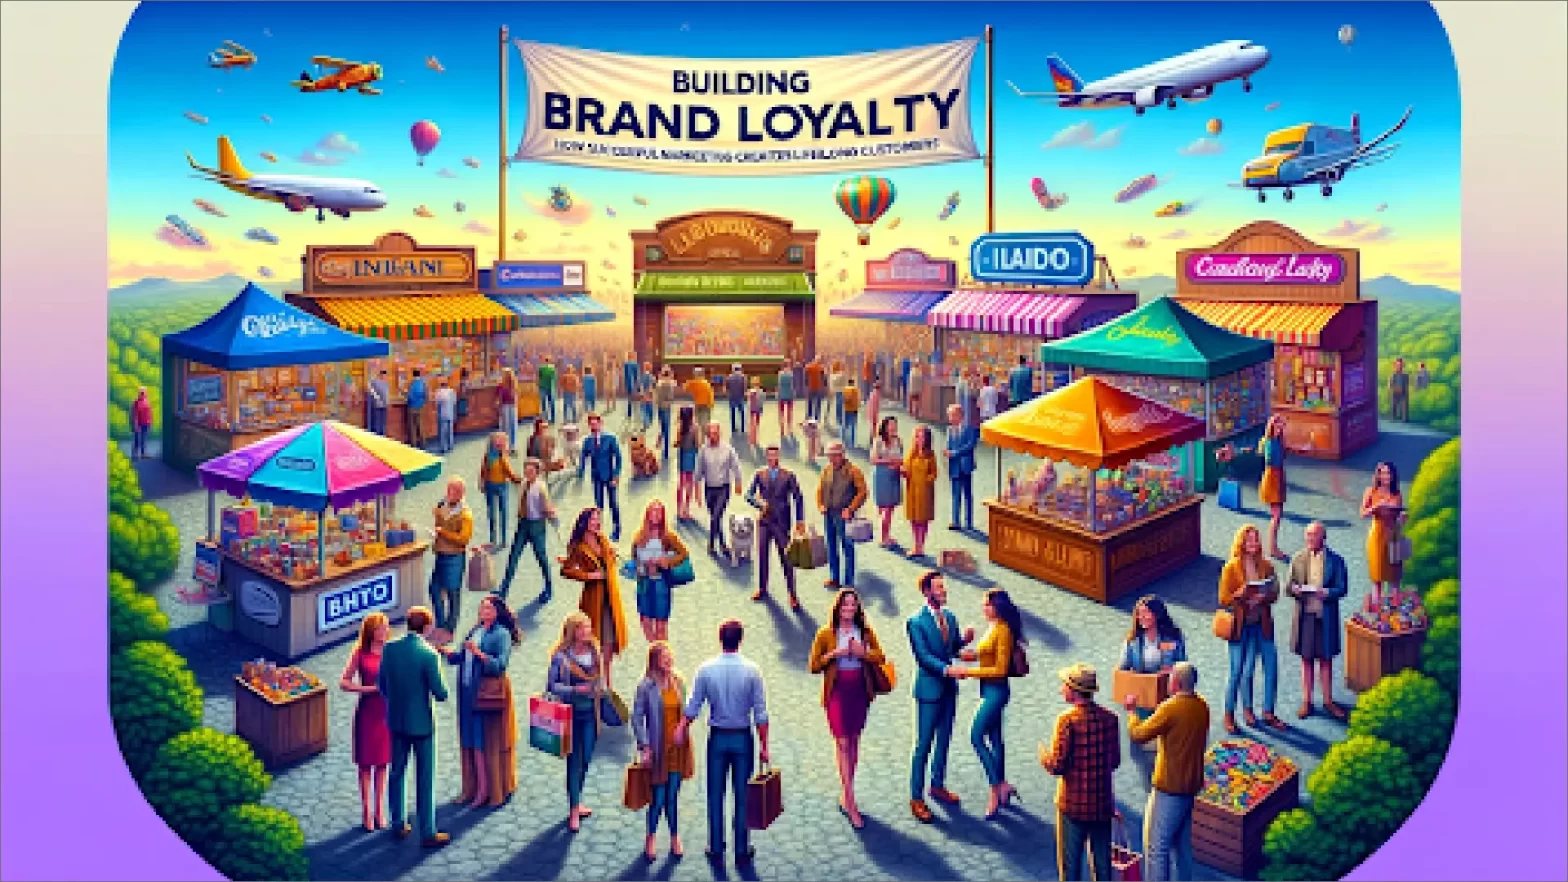 Explore how to build Brand Loyalty